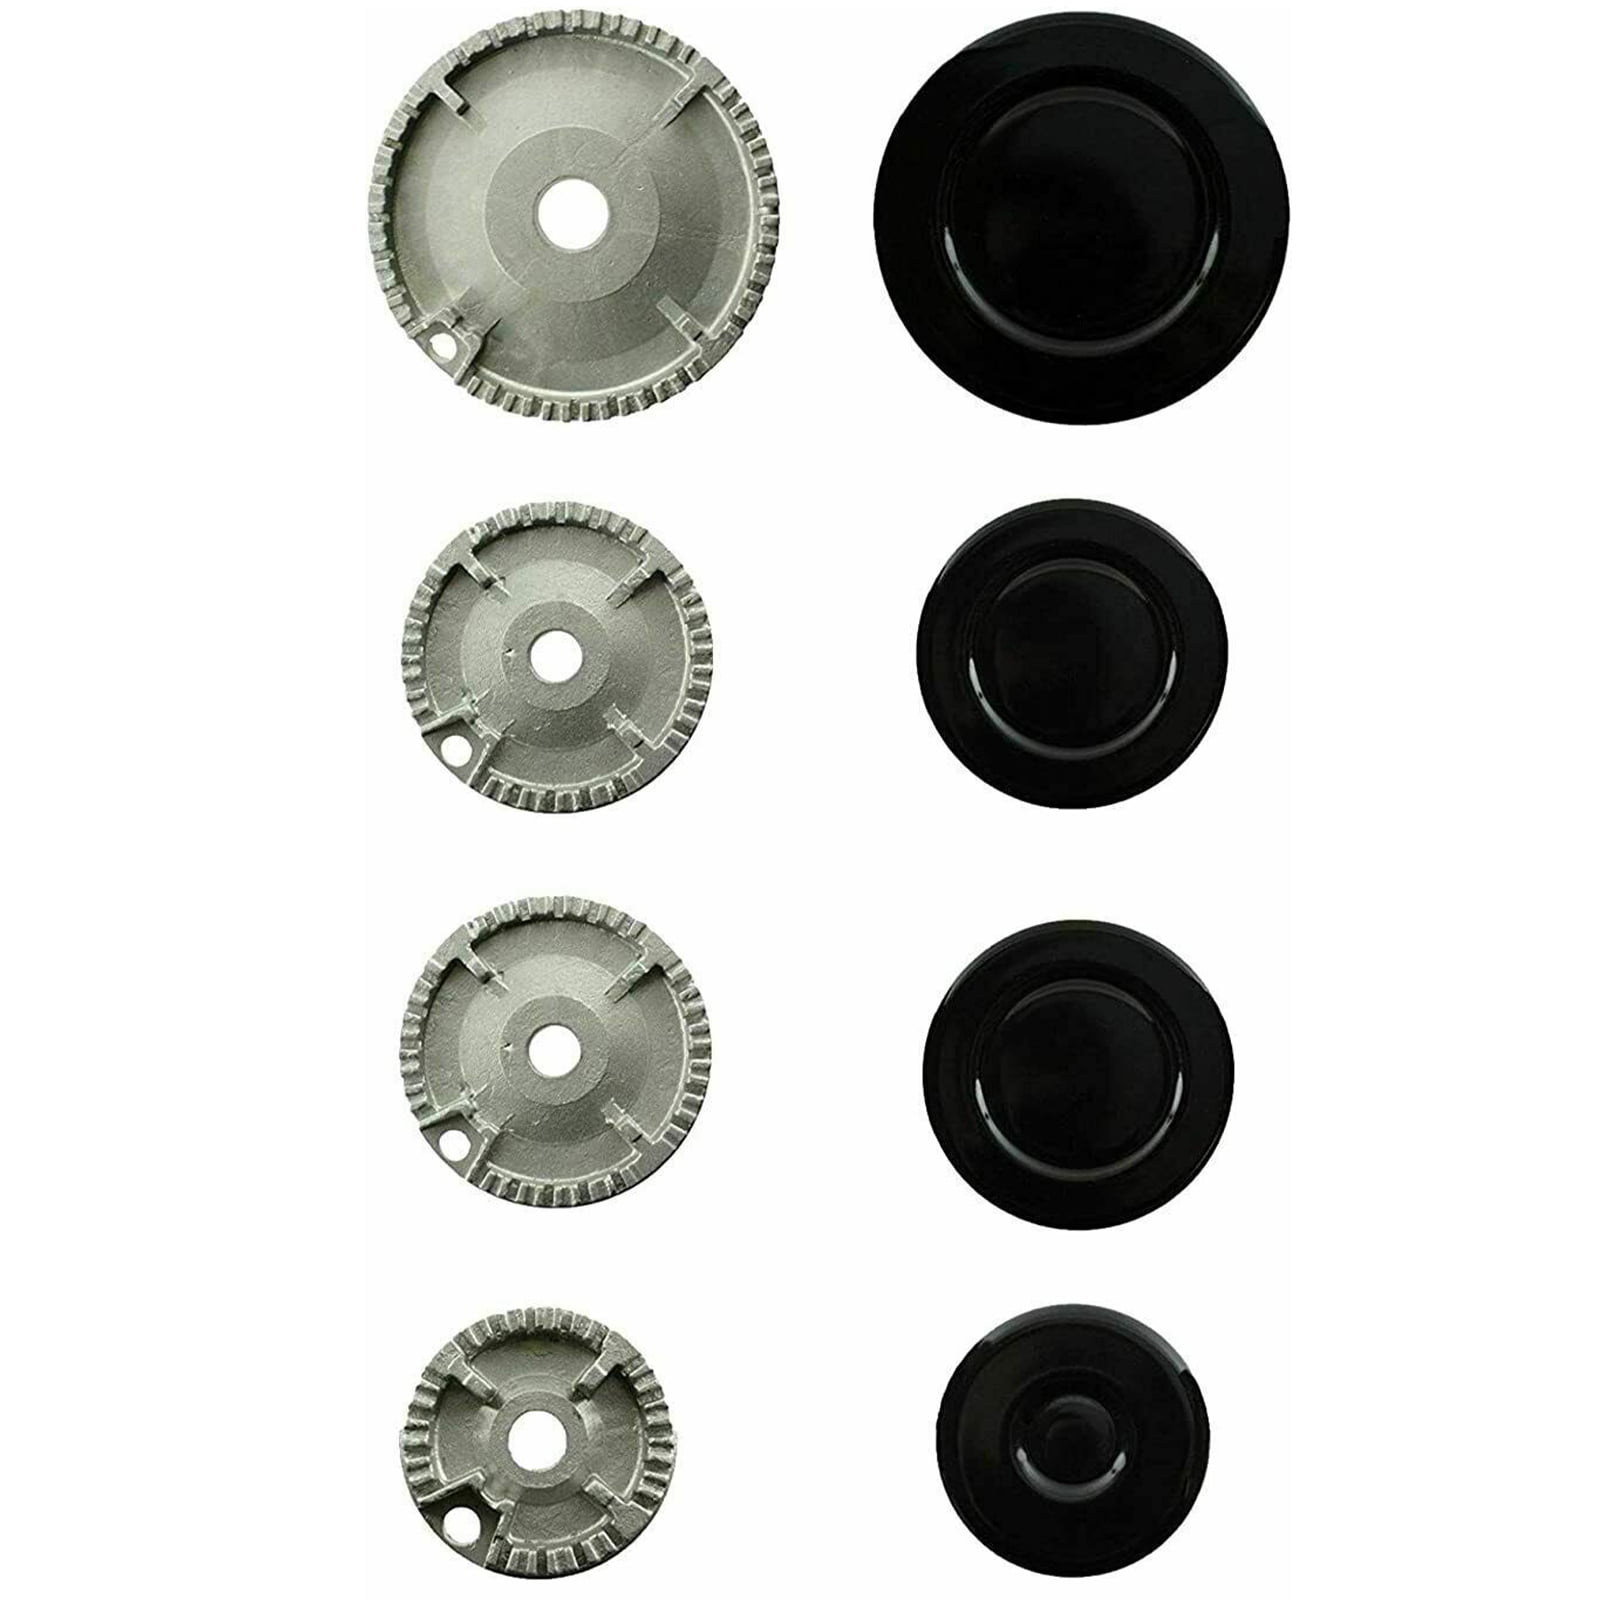 Gas Hob Burner Cap & Flame Crown Set for UNIVERSAL Cookers All Sizes 55-100mm 